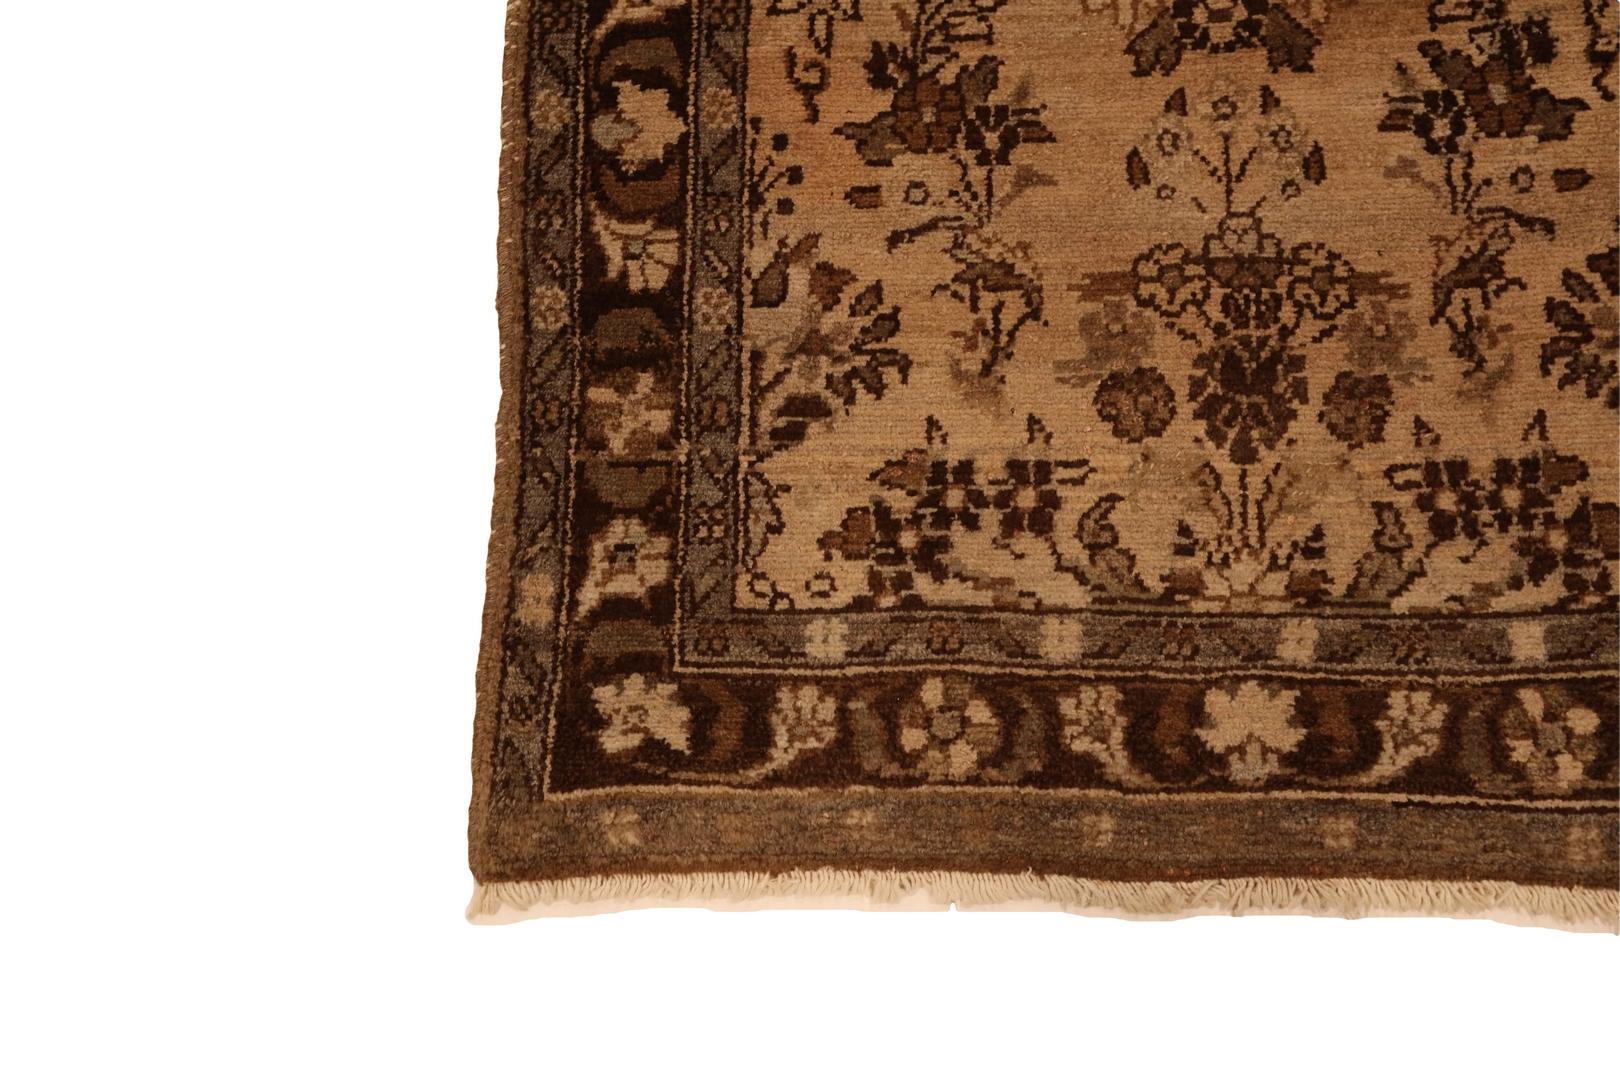 Introducing the Hamedan Runner, a timeless piece that effortlessly combines elegance with simplicity. This exquisite rug features a soothing beige background, creating a tranquil atmosphere in any hallway. The monochrome all-over floral design adds